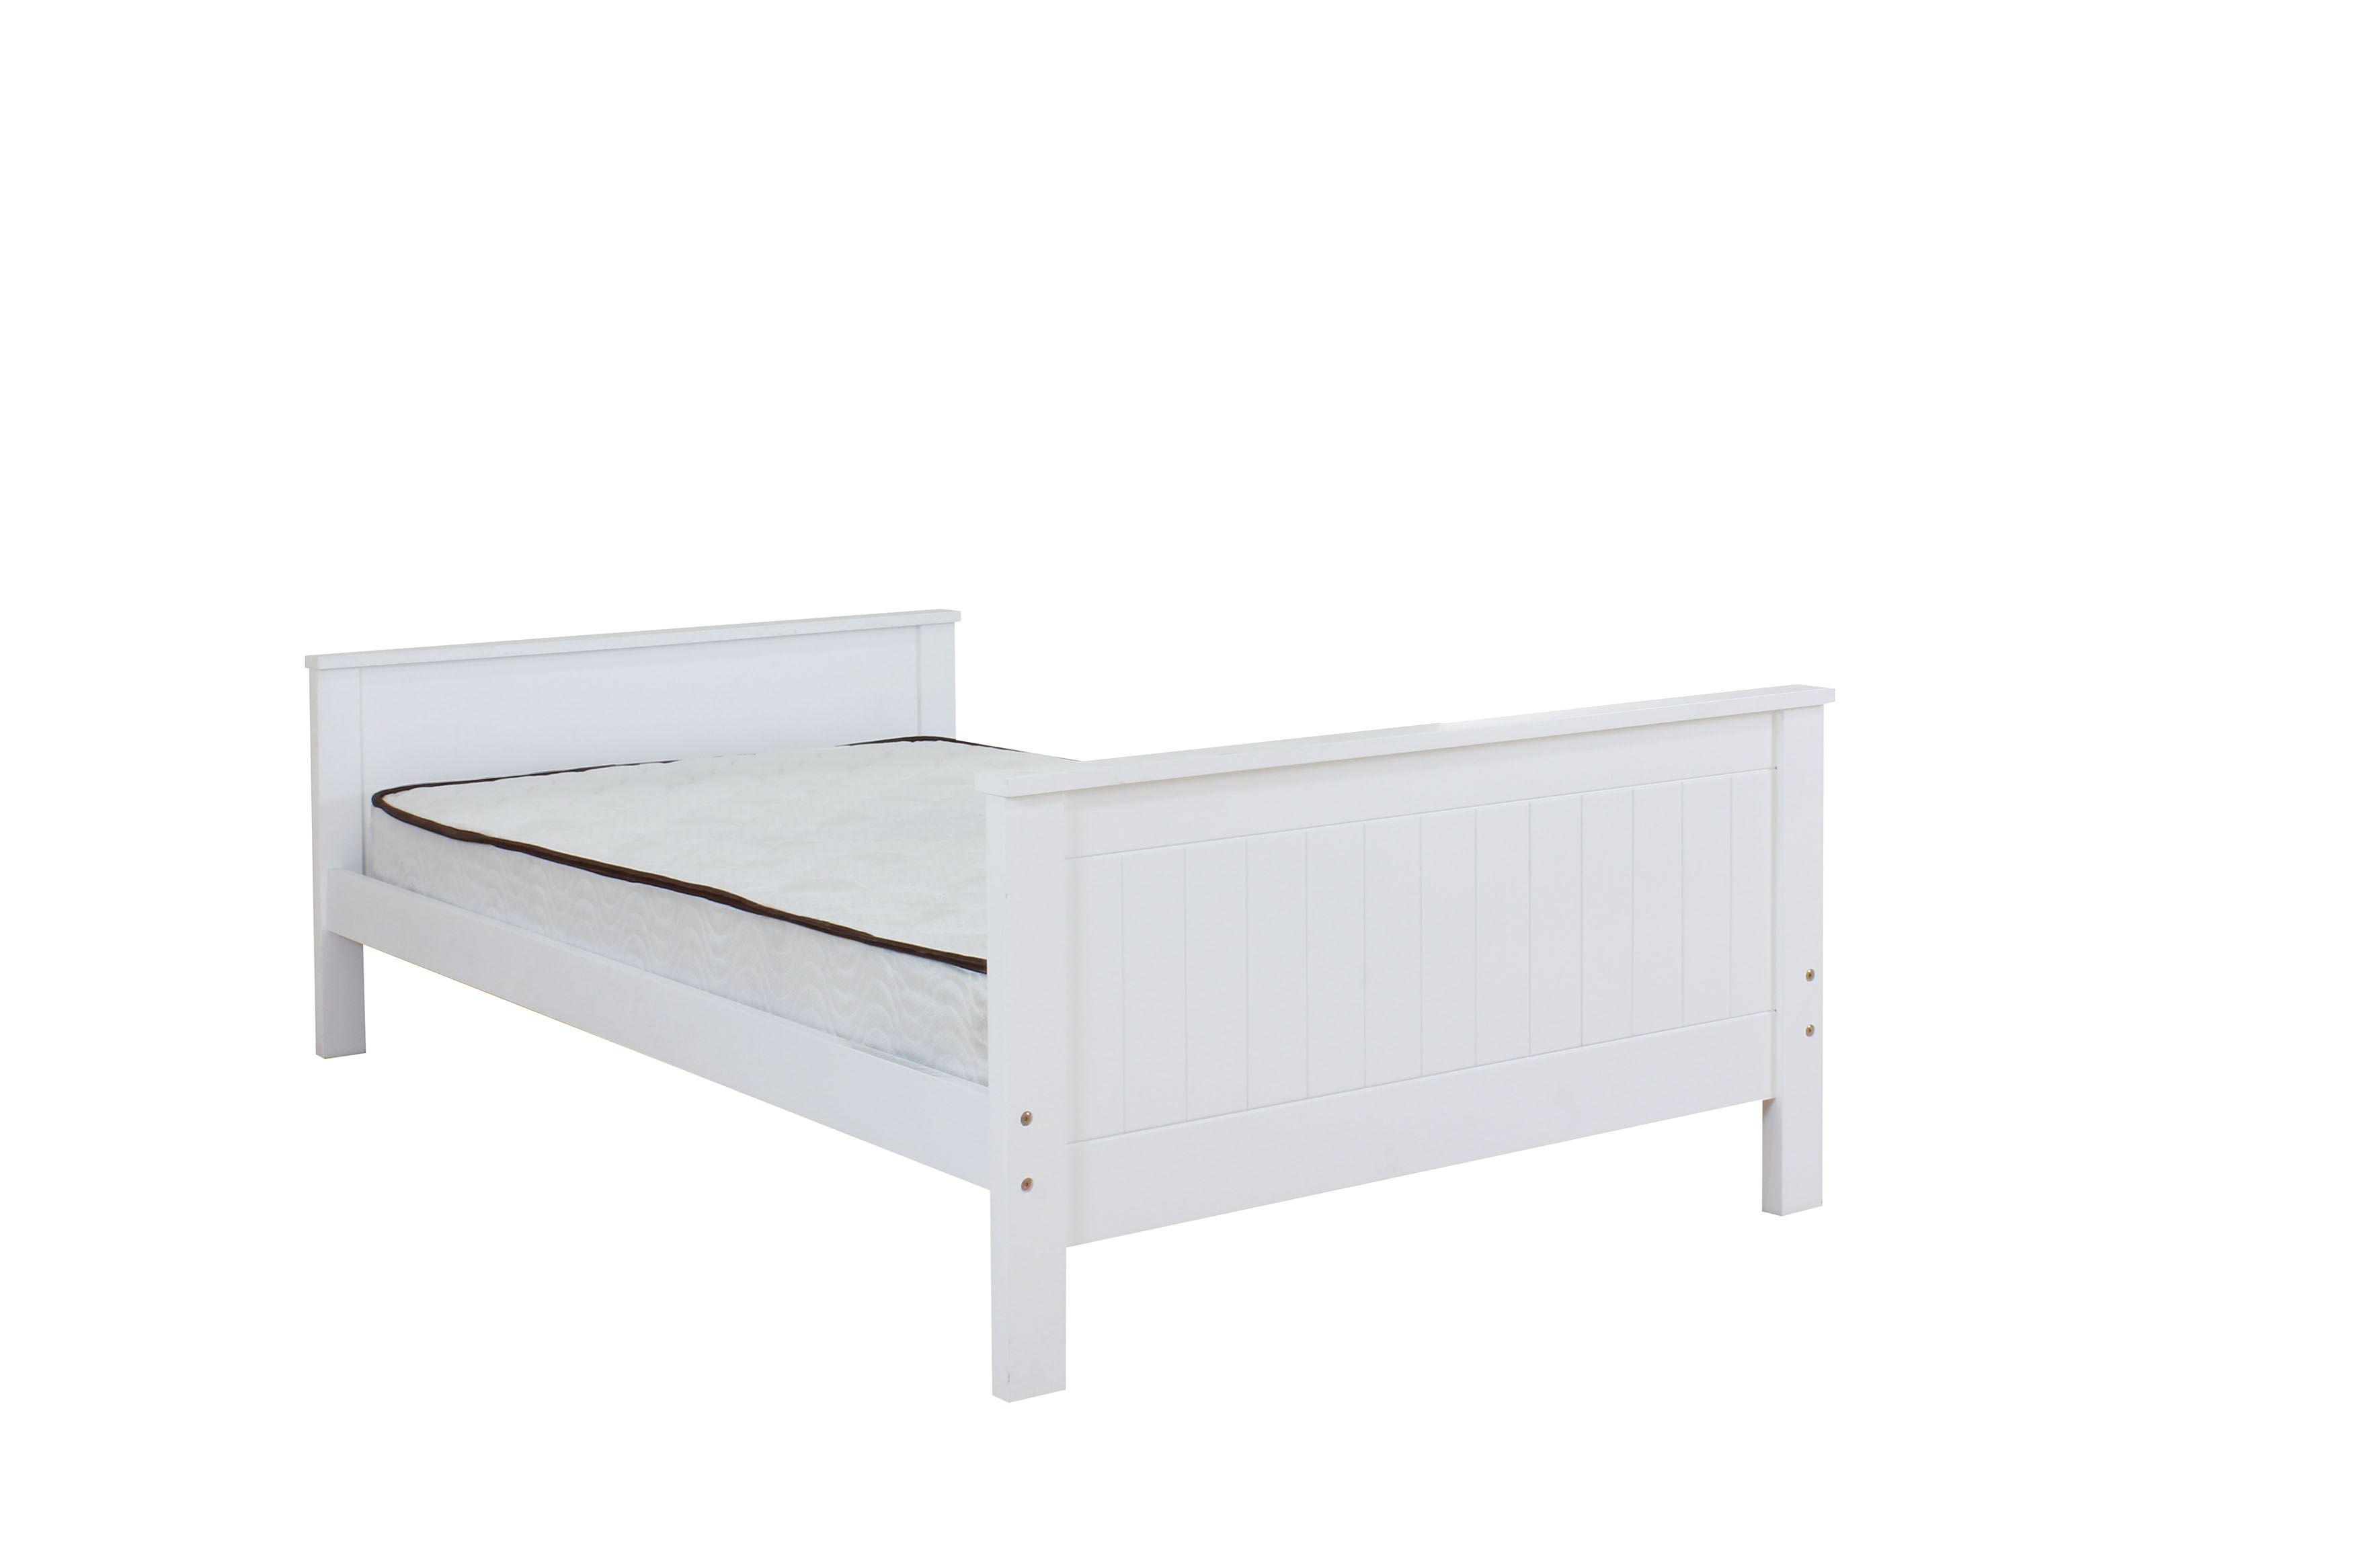 Transitional, Simple Twin Size Bed Willoughby 10978W in White 